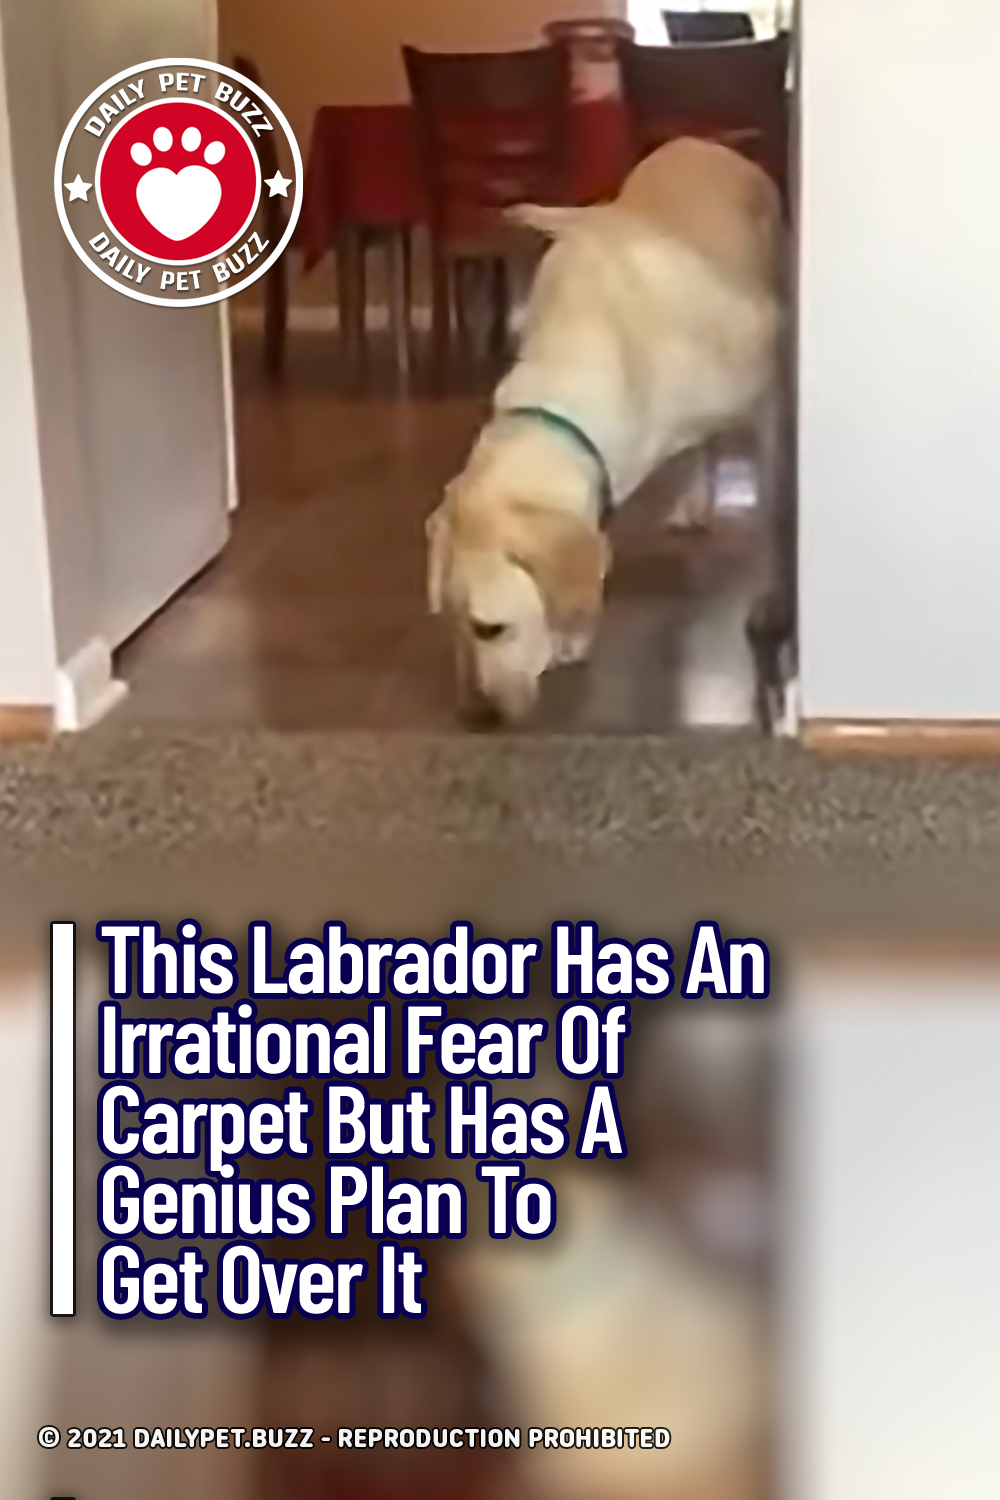 This Labrador Has An Irrational Fear Of Carpet But Has A Genius Plan To Get Over It